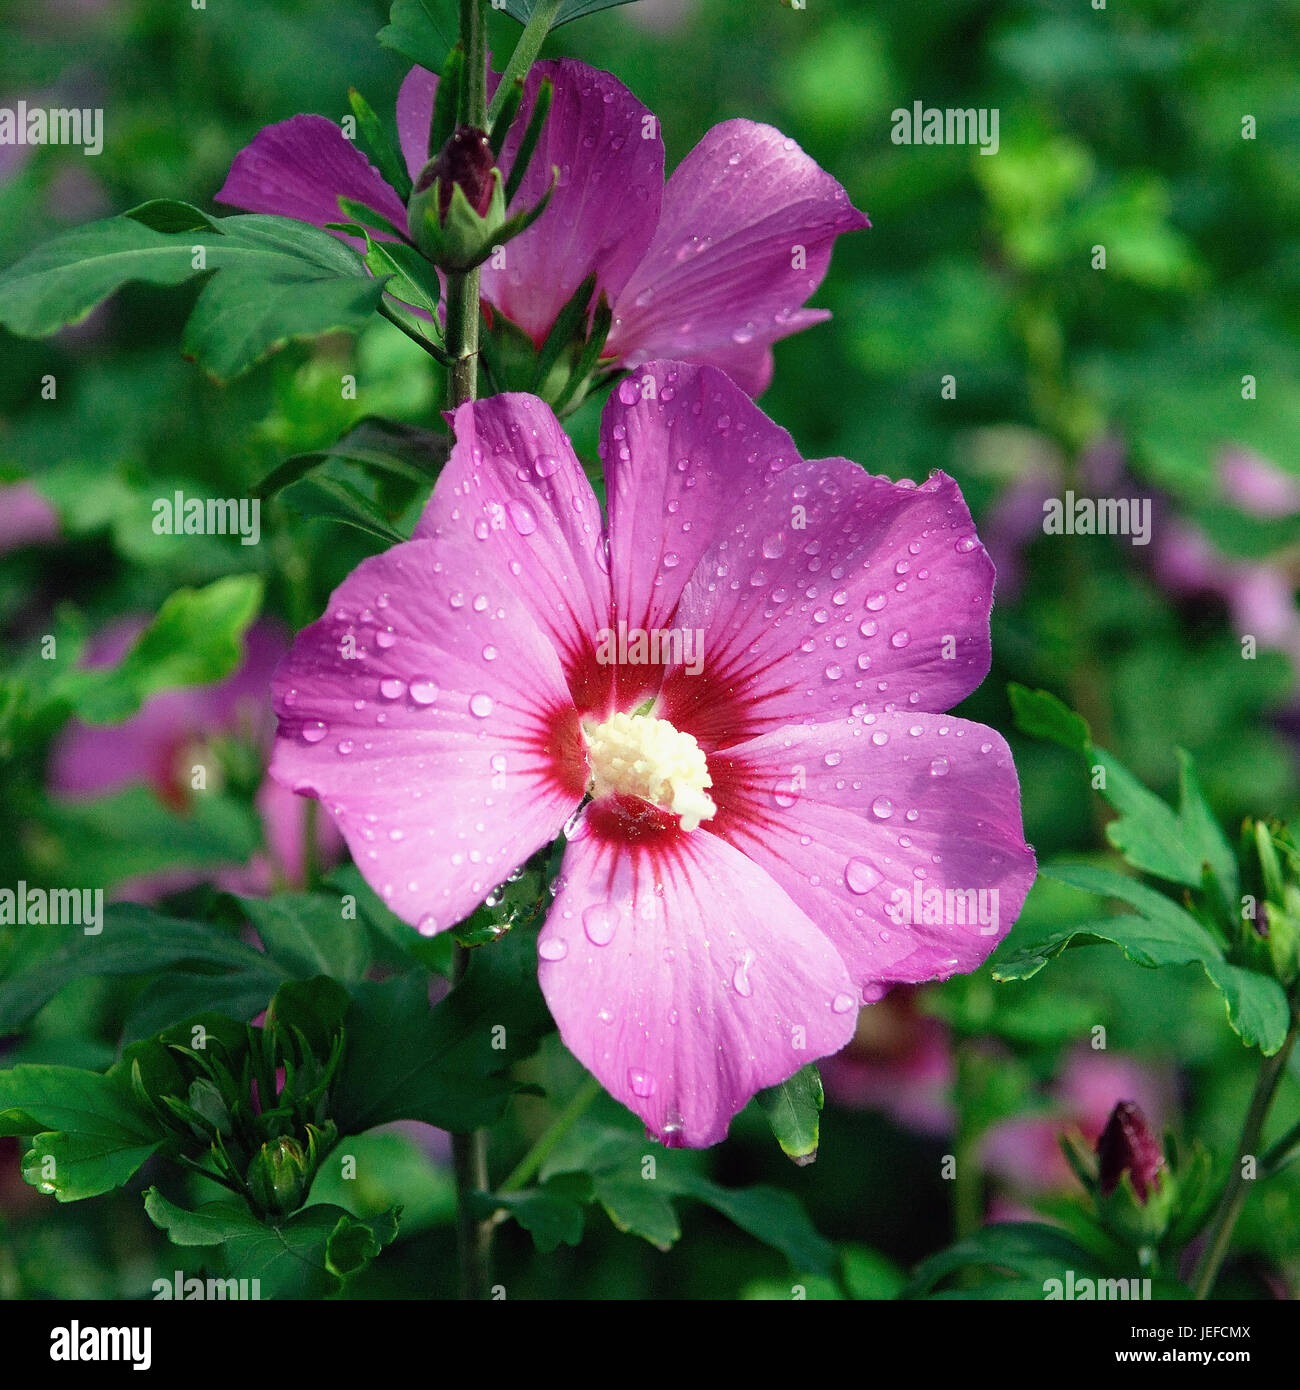 Hibiscus syriacus Russian Violet, Hibiscus syriacus 'Russian Violet' Stock Photo